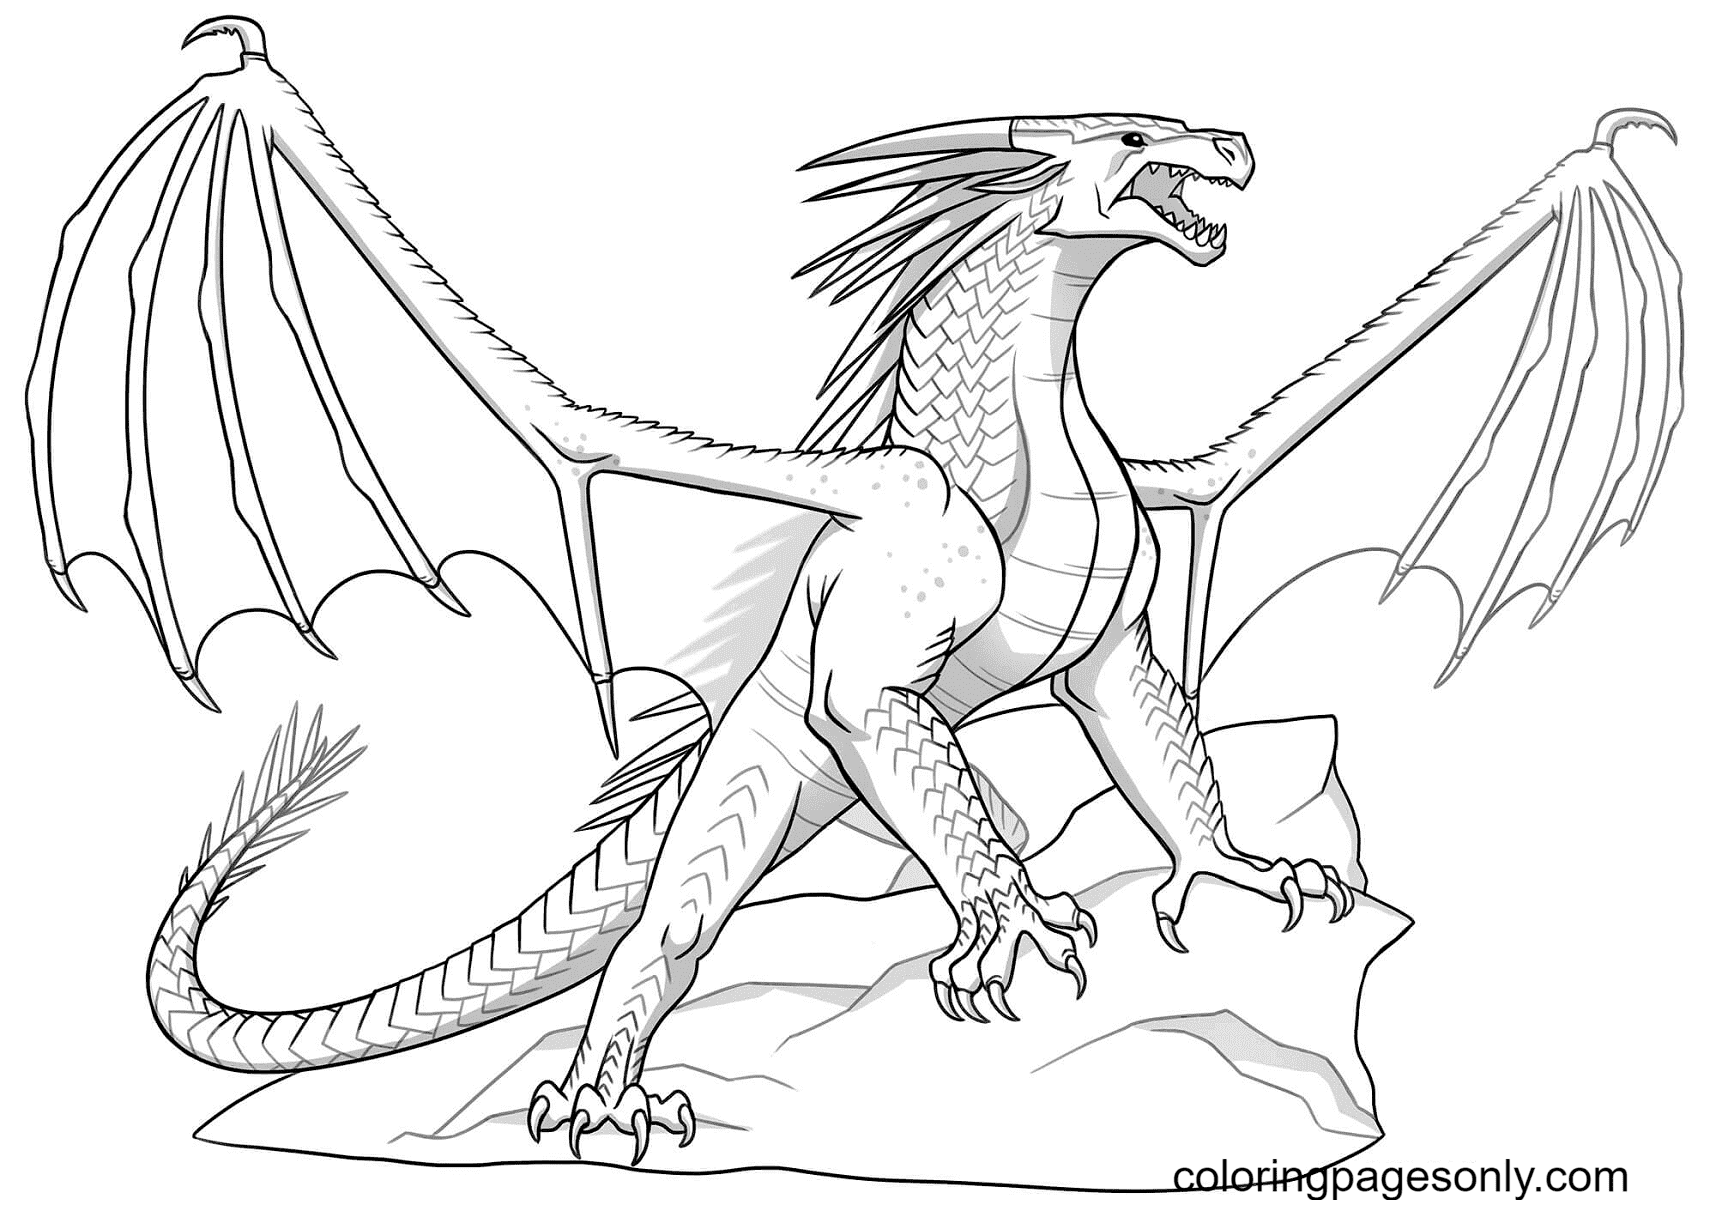 Icewing Dragon Coloring Pages - Wings Of Fire Coloring Pages - Coloring  Pages For Kids And Adults